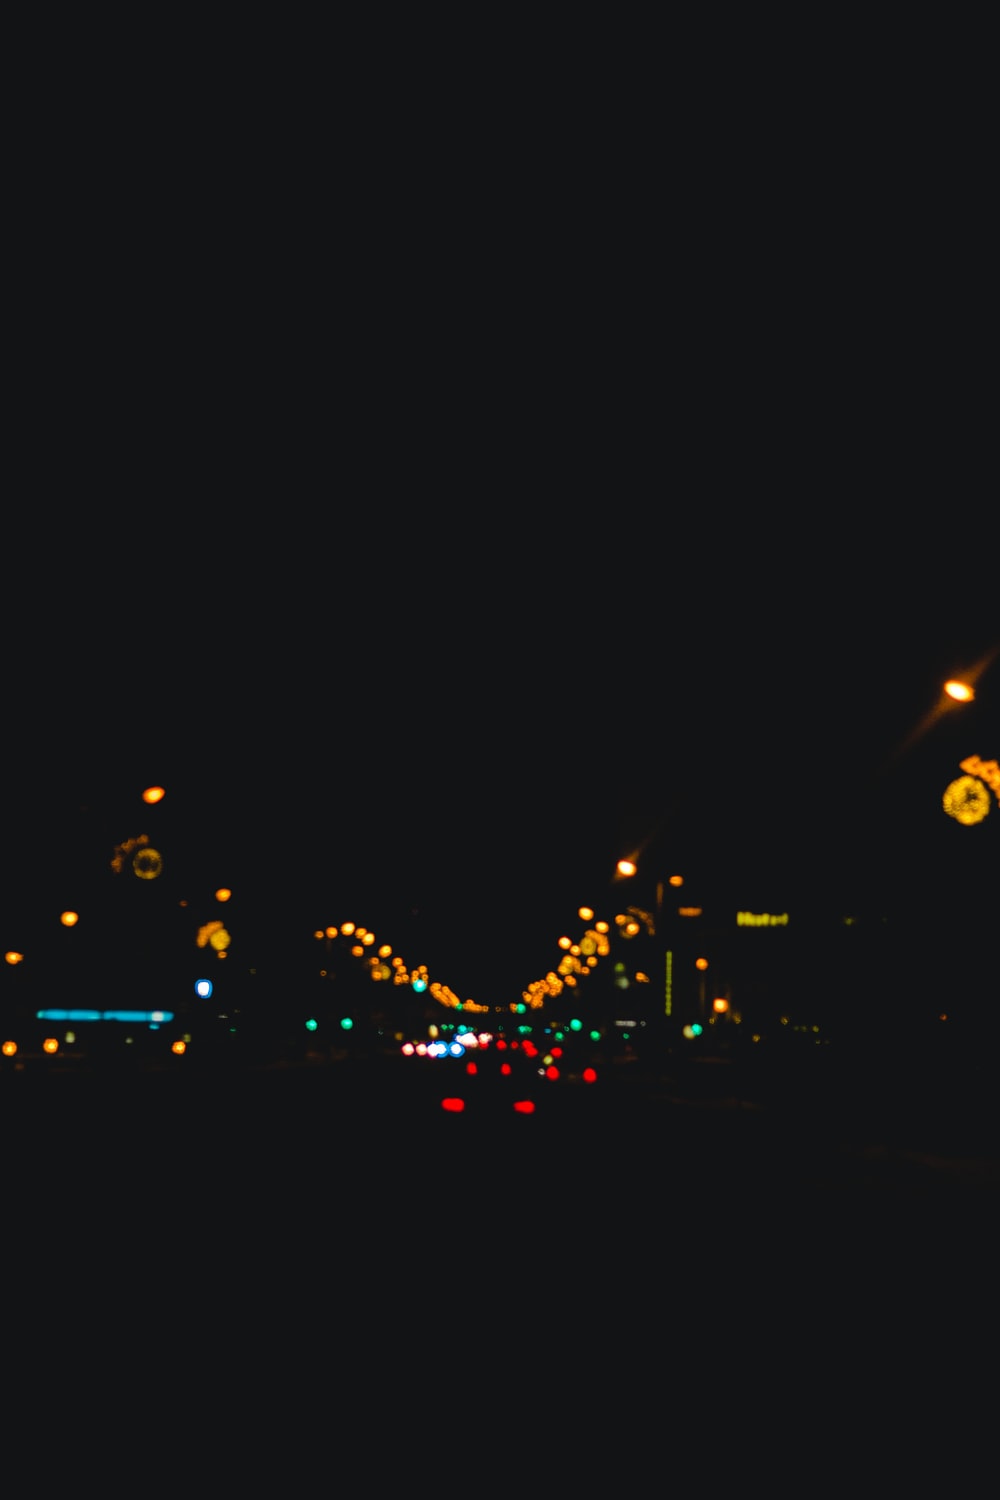 Night Drive Picture. Download Free Image